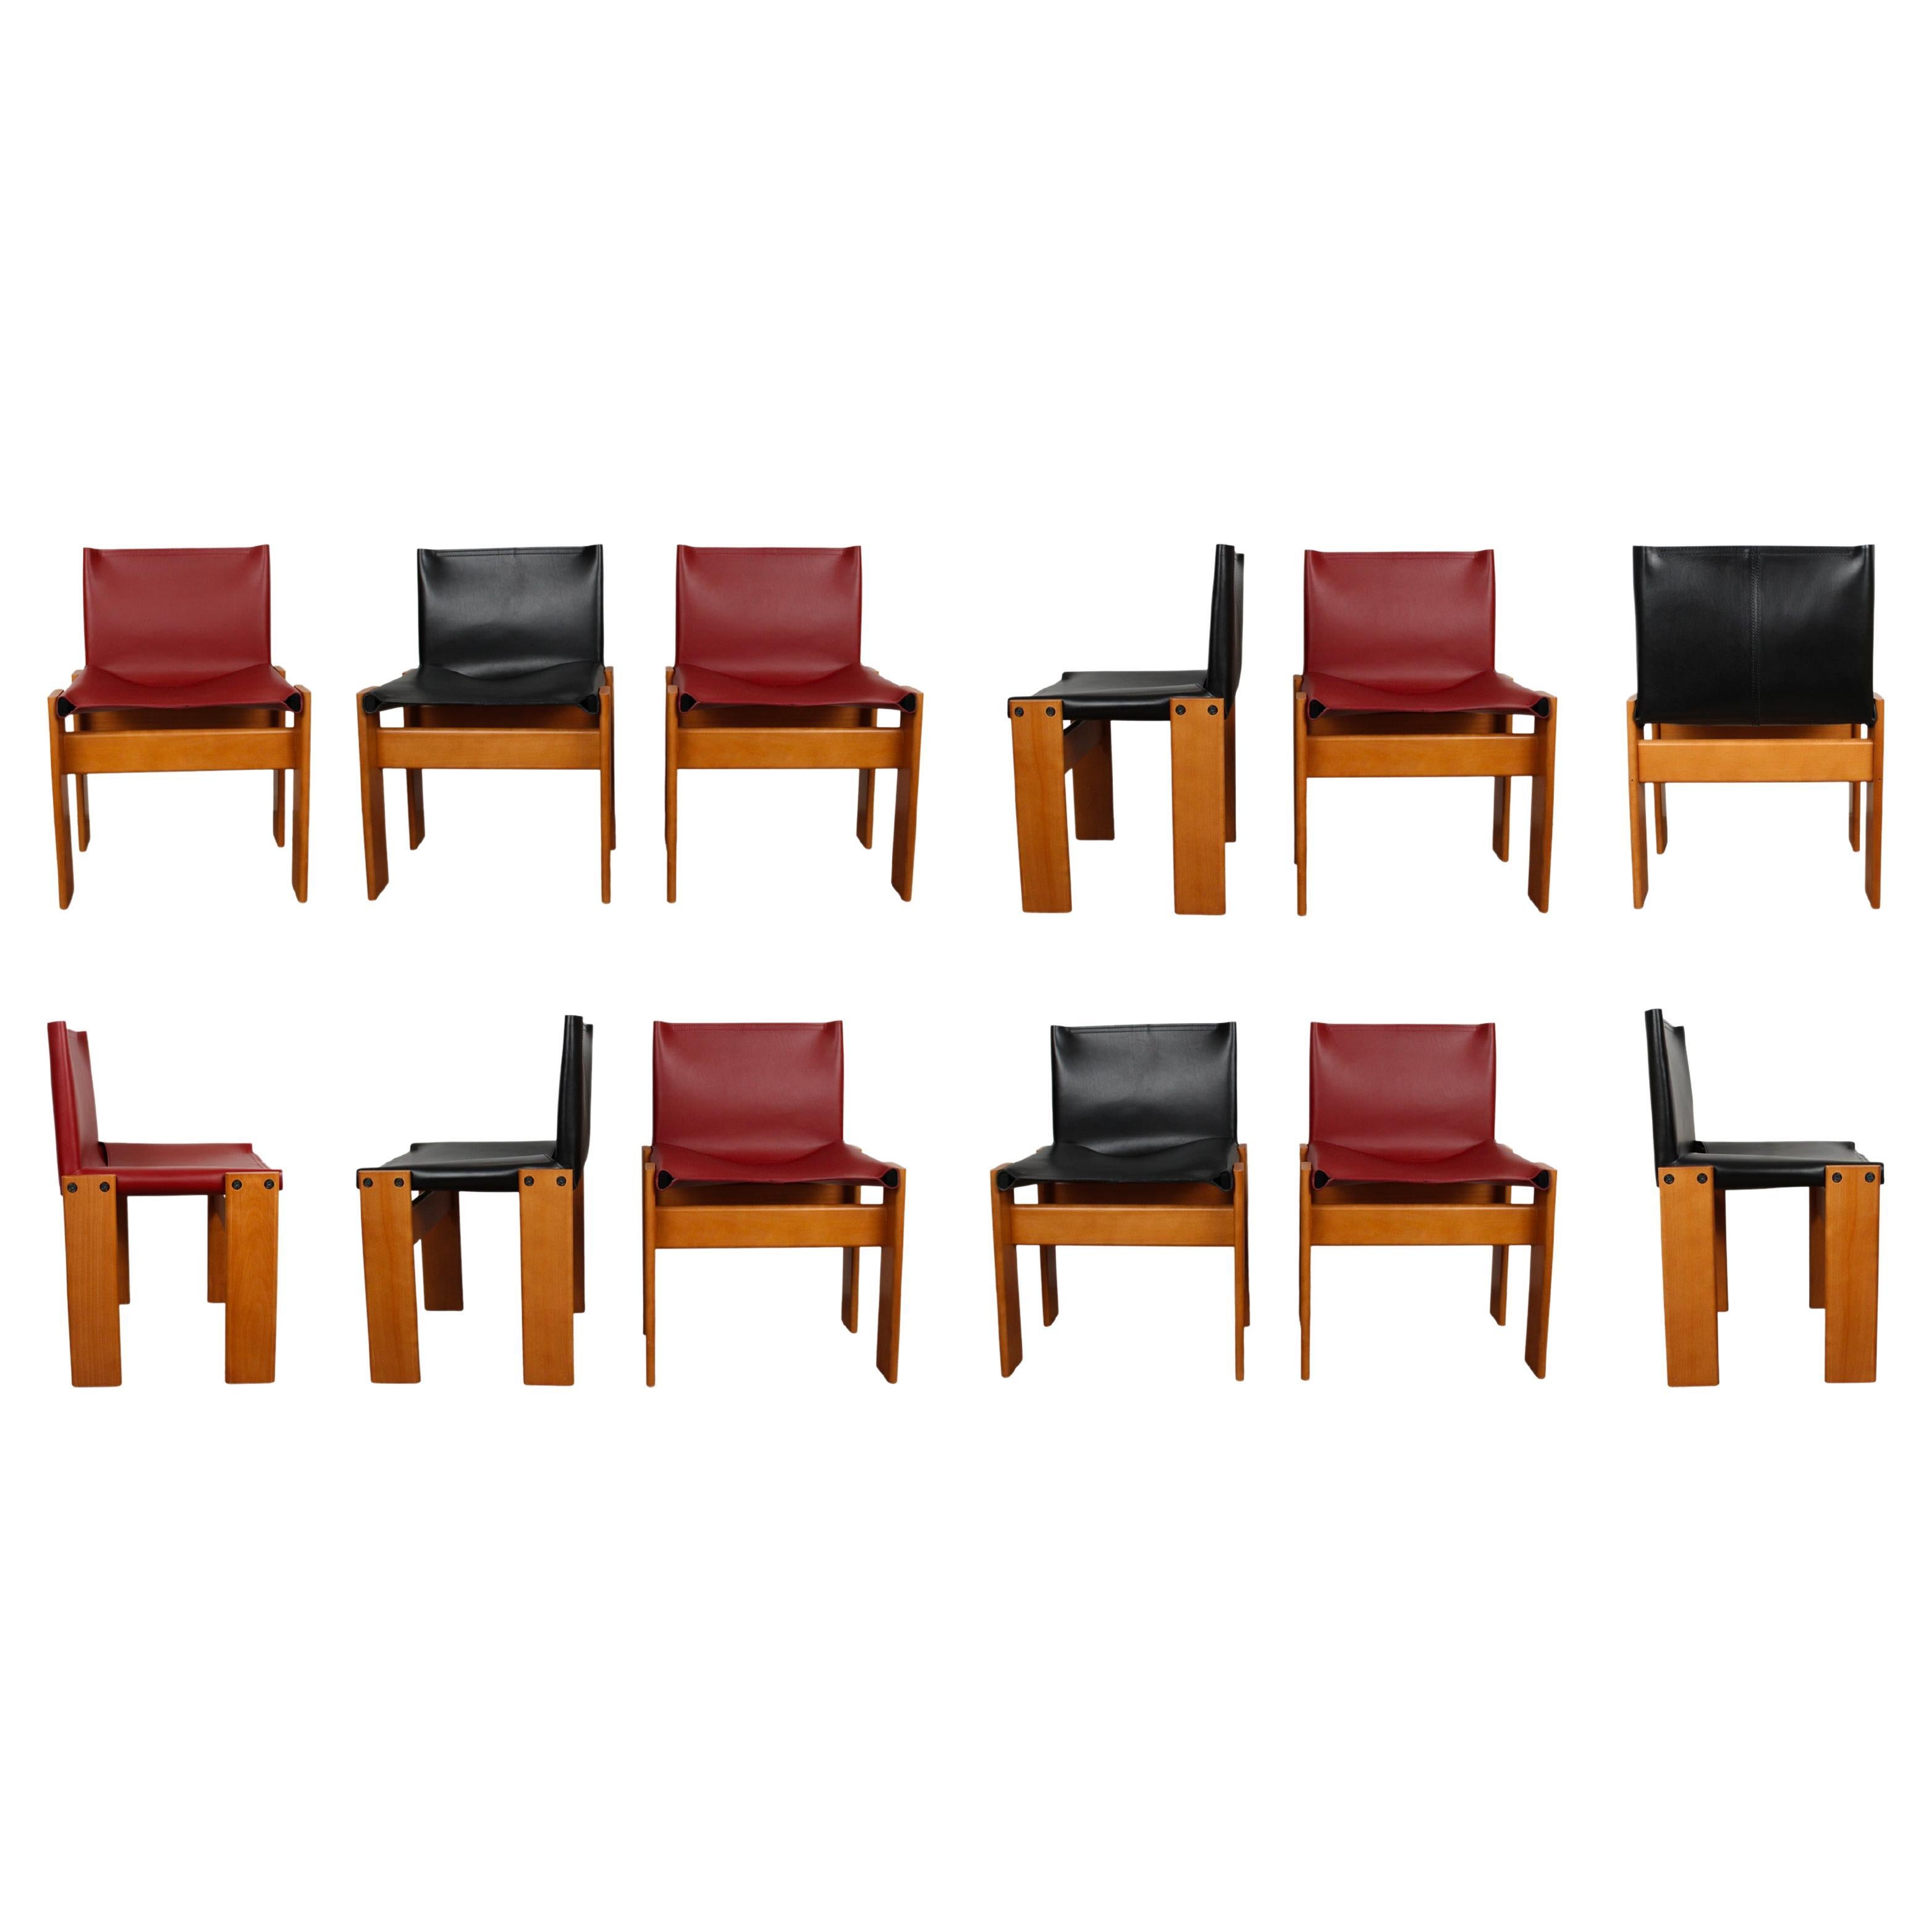 Set of twelve “Monk” dining chairs designed by Afra and Tobia Scarpa for Molteni in 1973.
Made of English red and black leather and walnut.
Fully restored in Italy.

Interesting is the ‘flat’ shape of this chair where the designer has chosen to